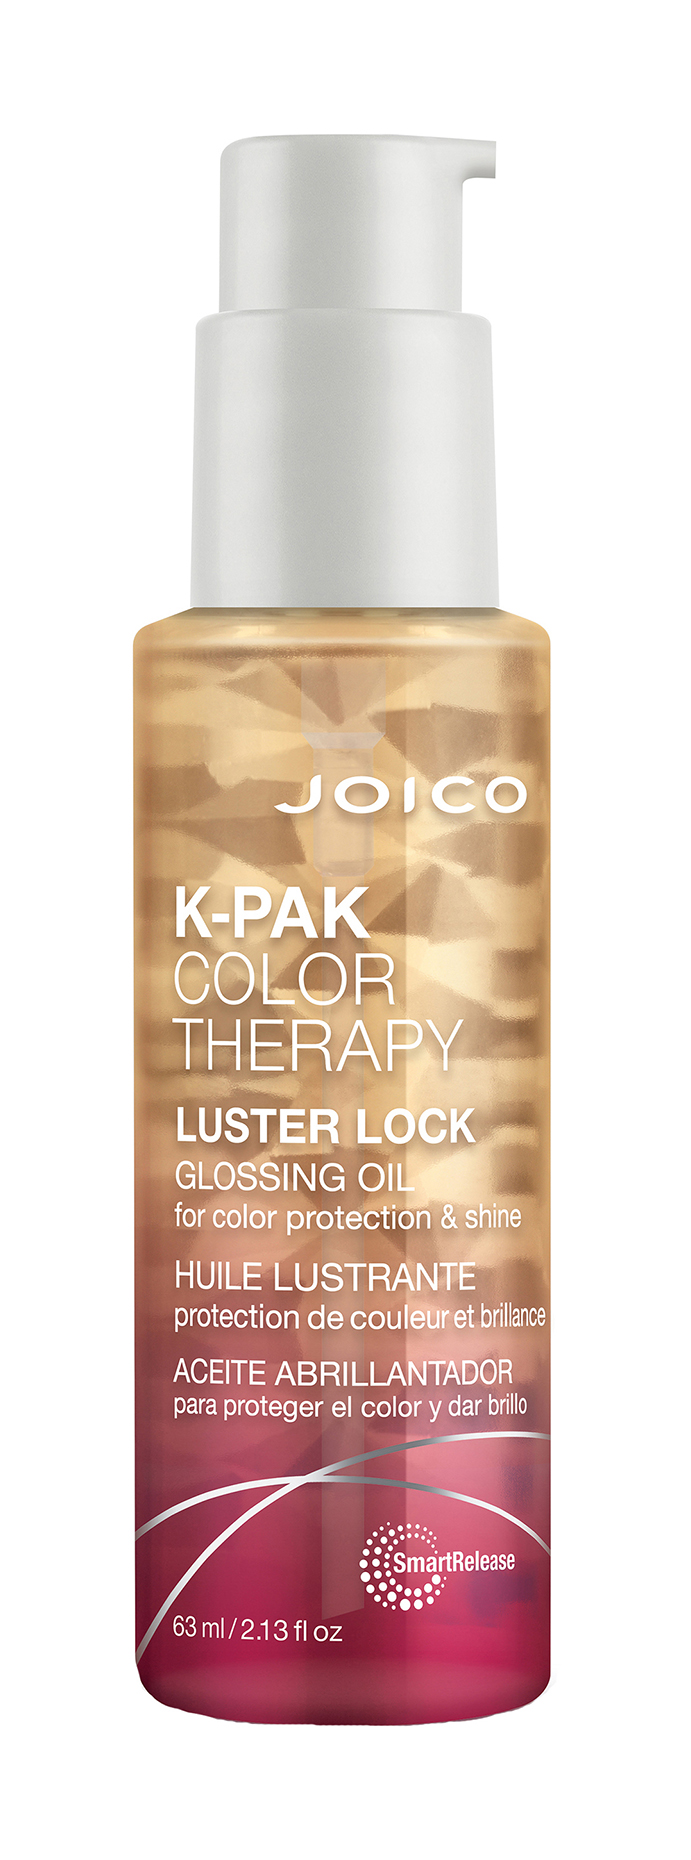 Масло Joico K-Pak для волос Color Therapy Luster Lock Glossing Oil 63 мл